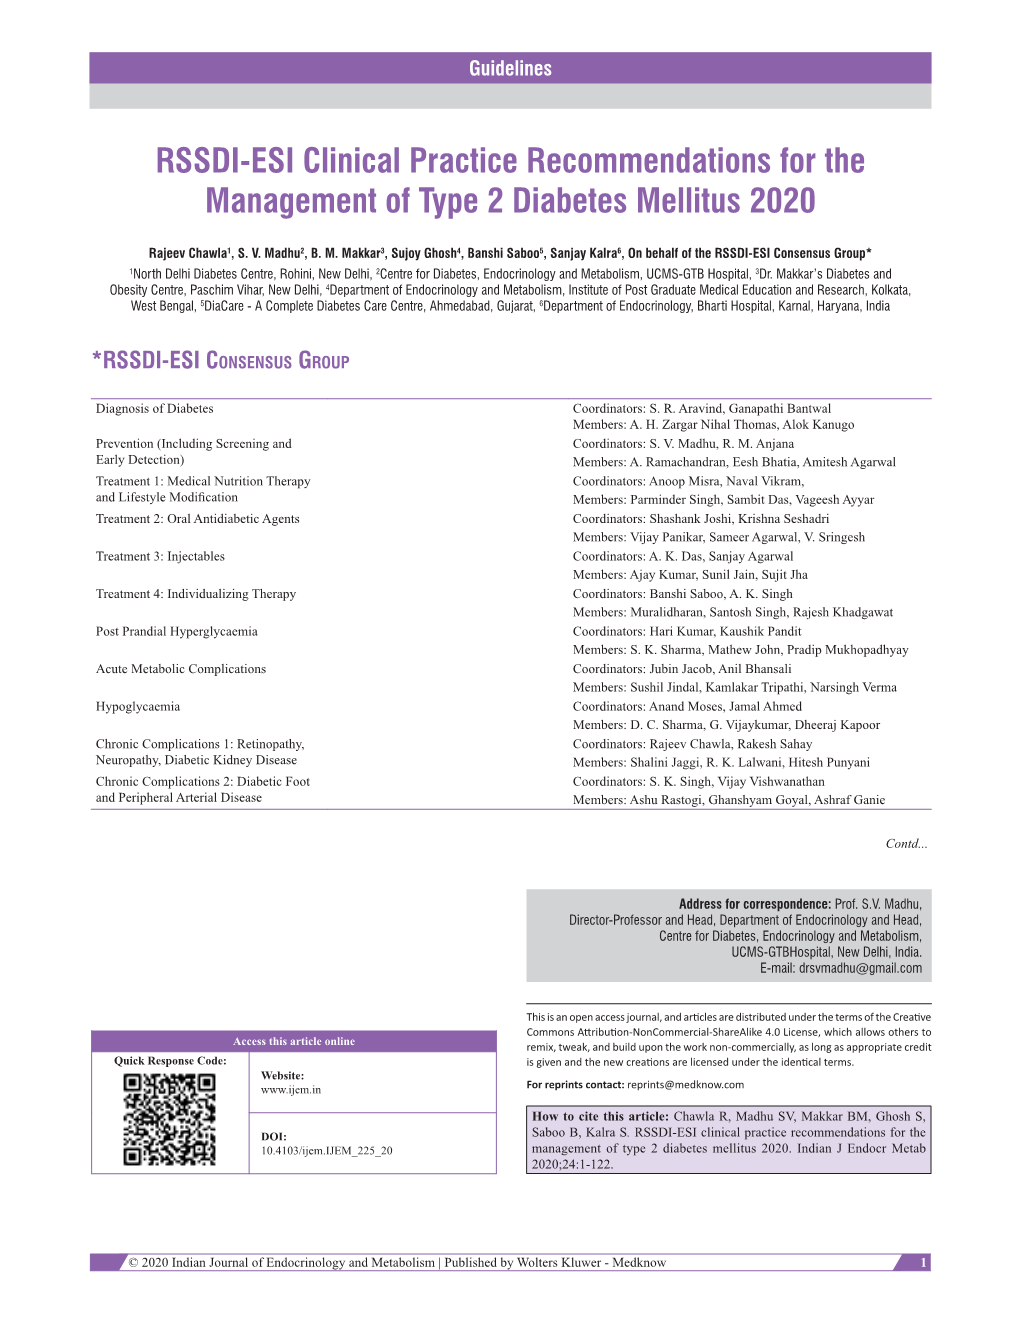 RSSDI-ESI Clinical Practice Recommendations for the Management of Type 2 Diabetes Mellitus 2020